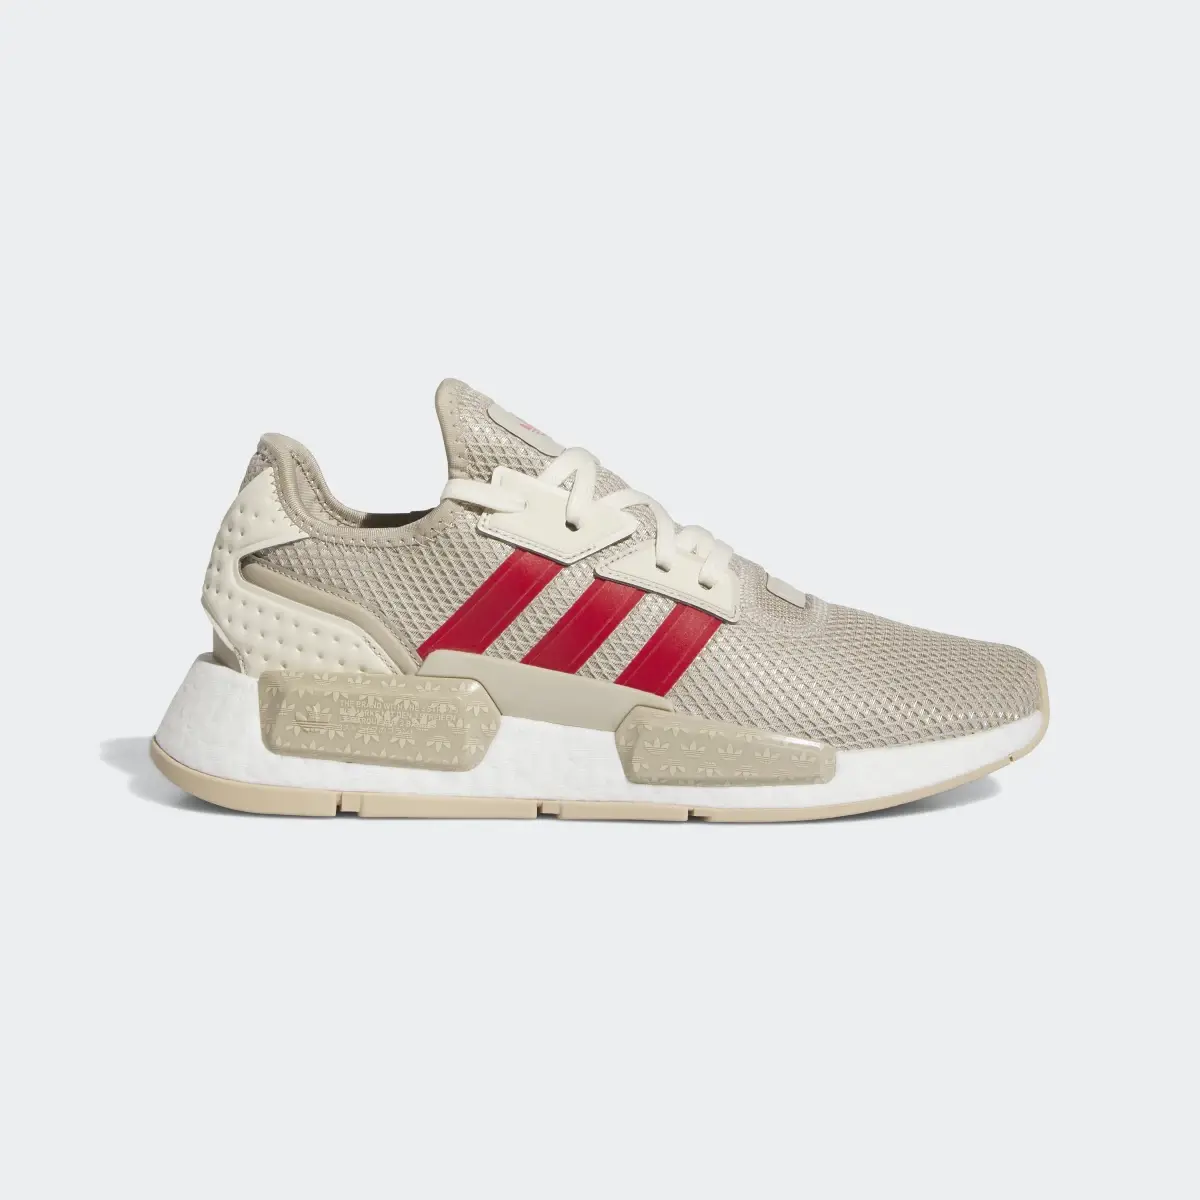 Adidas NMD_G1 Shoes. 2